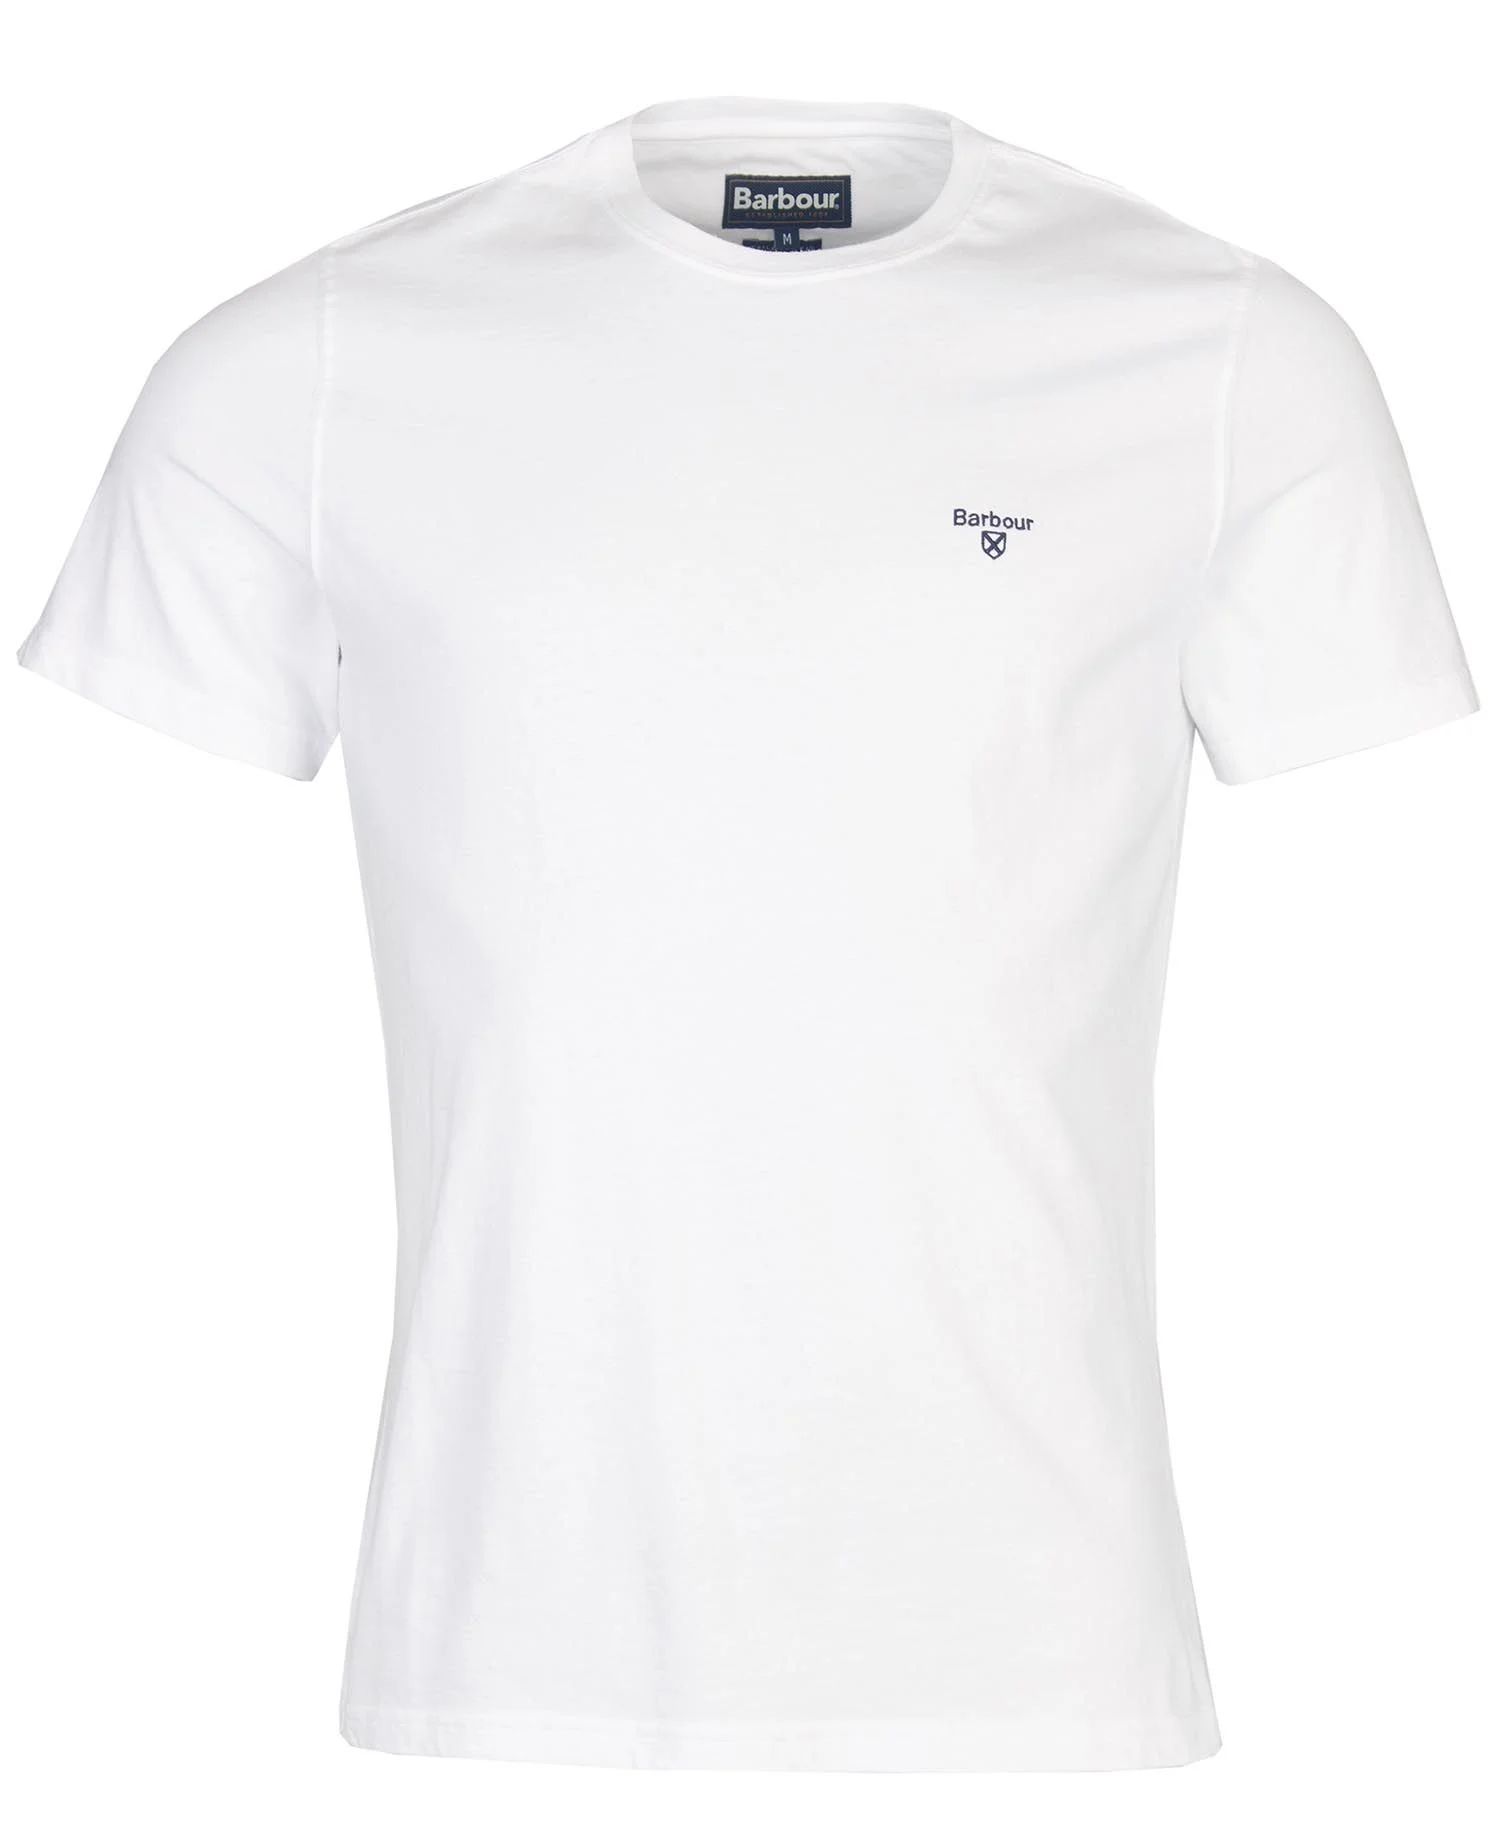 Barbour Sports Tee White